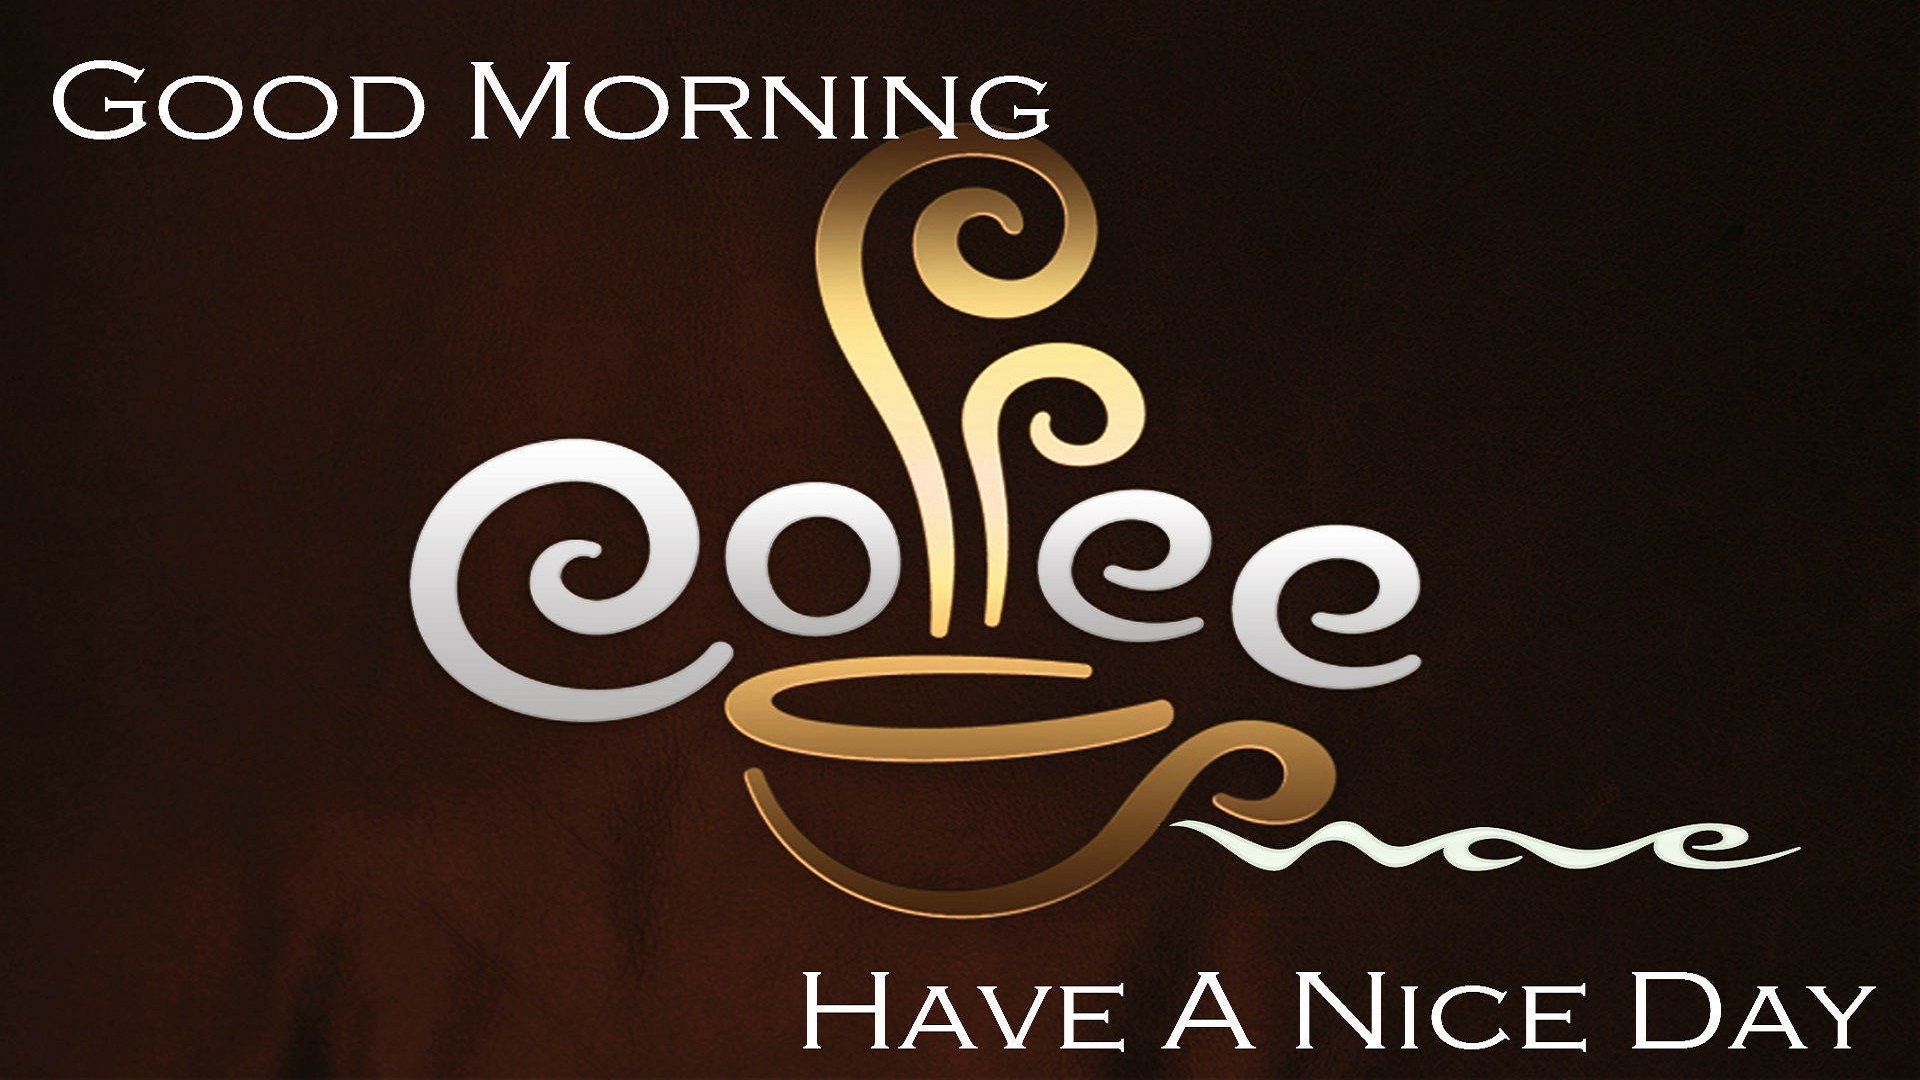 Good Morning Wishes HD Images & Pictures Free Download